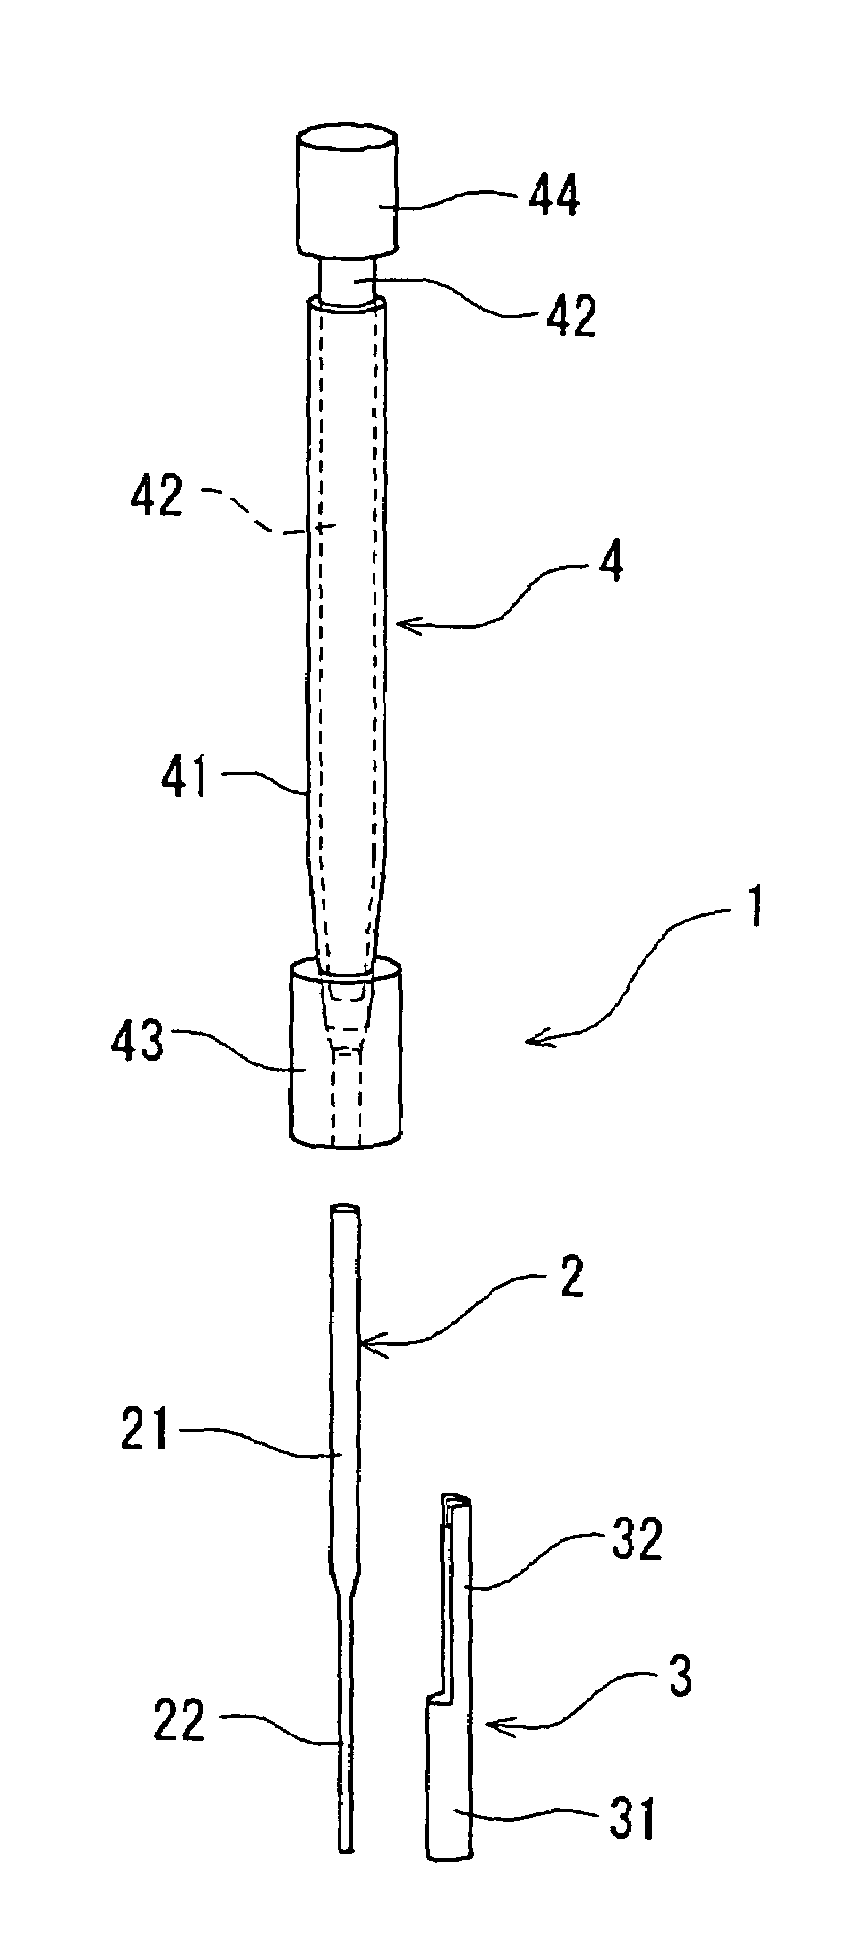 Egg freezing and storing tool and method